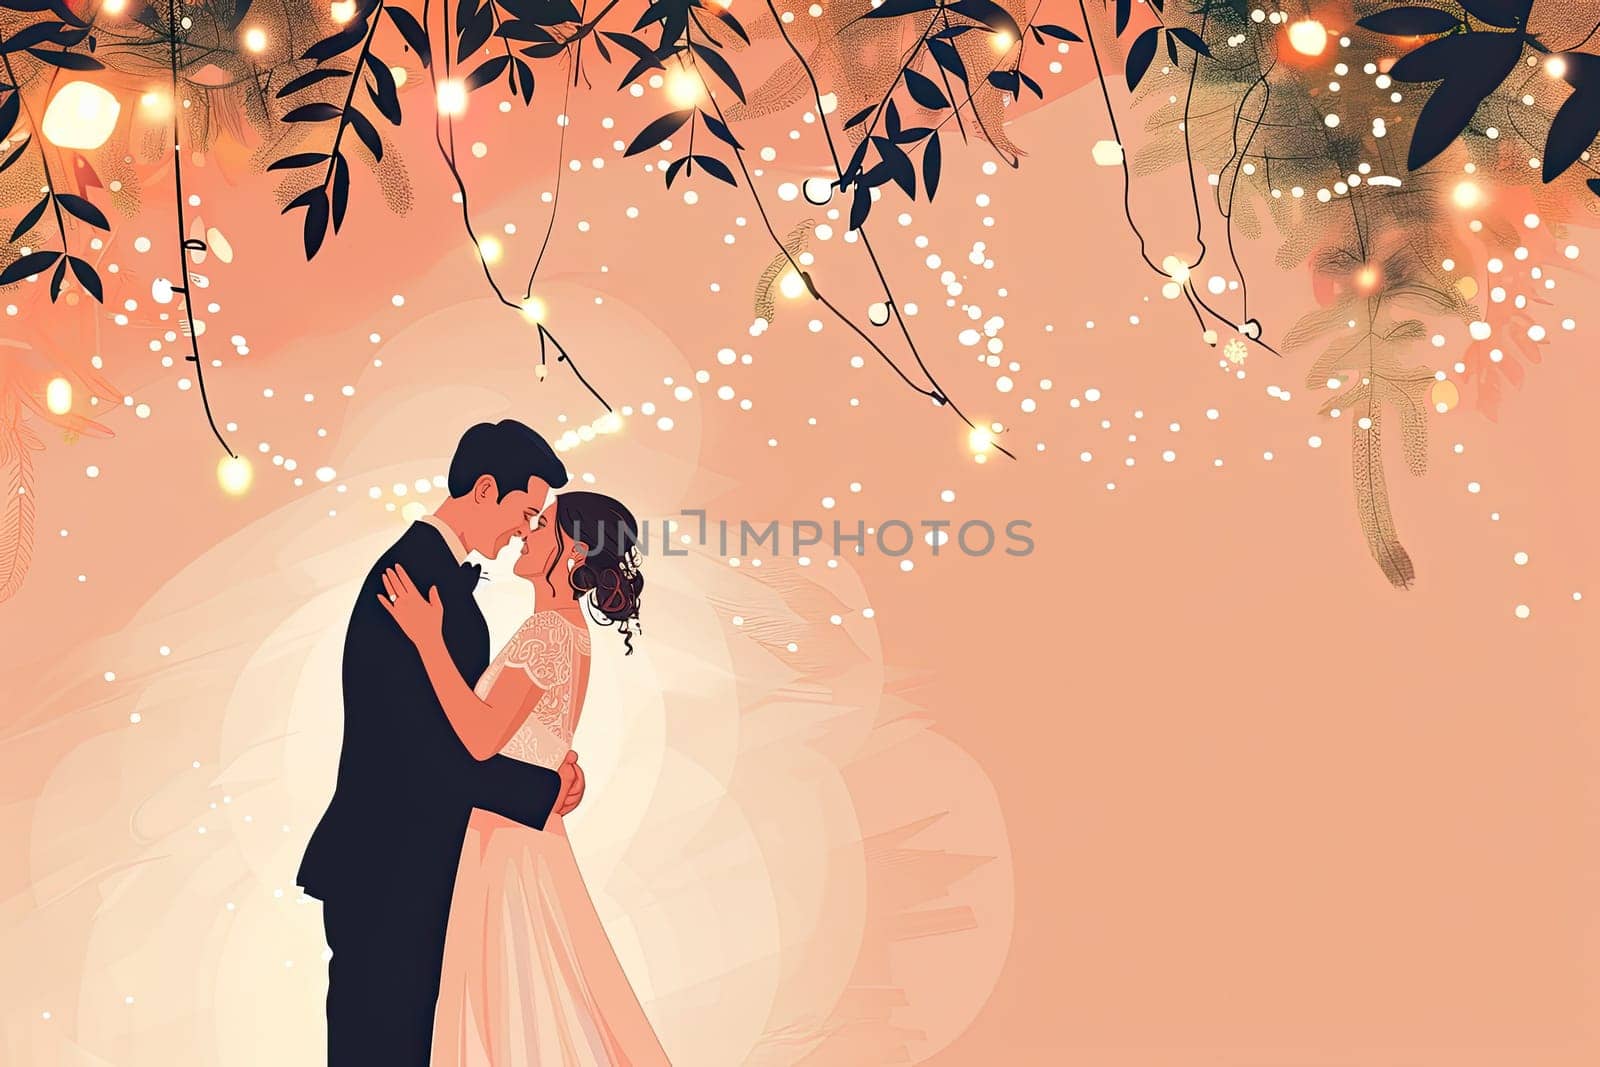 Illustration of Groom and Bride Dancing First Dance Surrounded by Twinkling Lights and Romantic Ambiance Concept Wedding Romance.